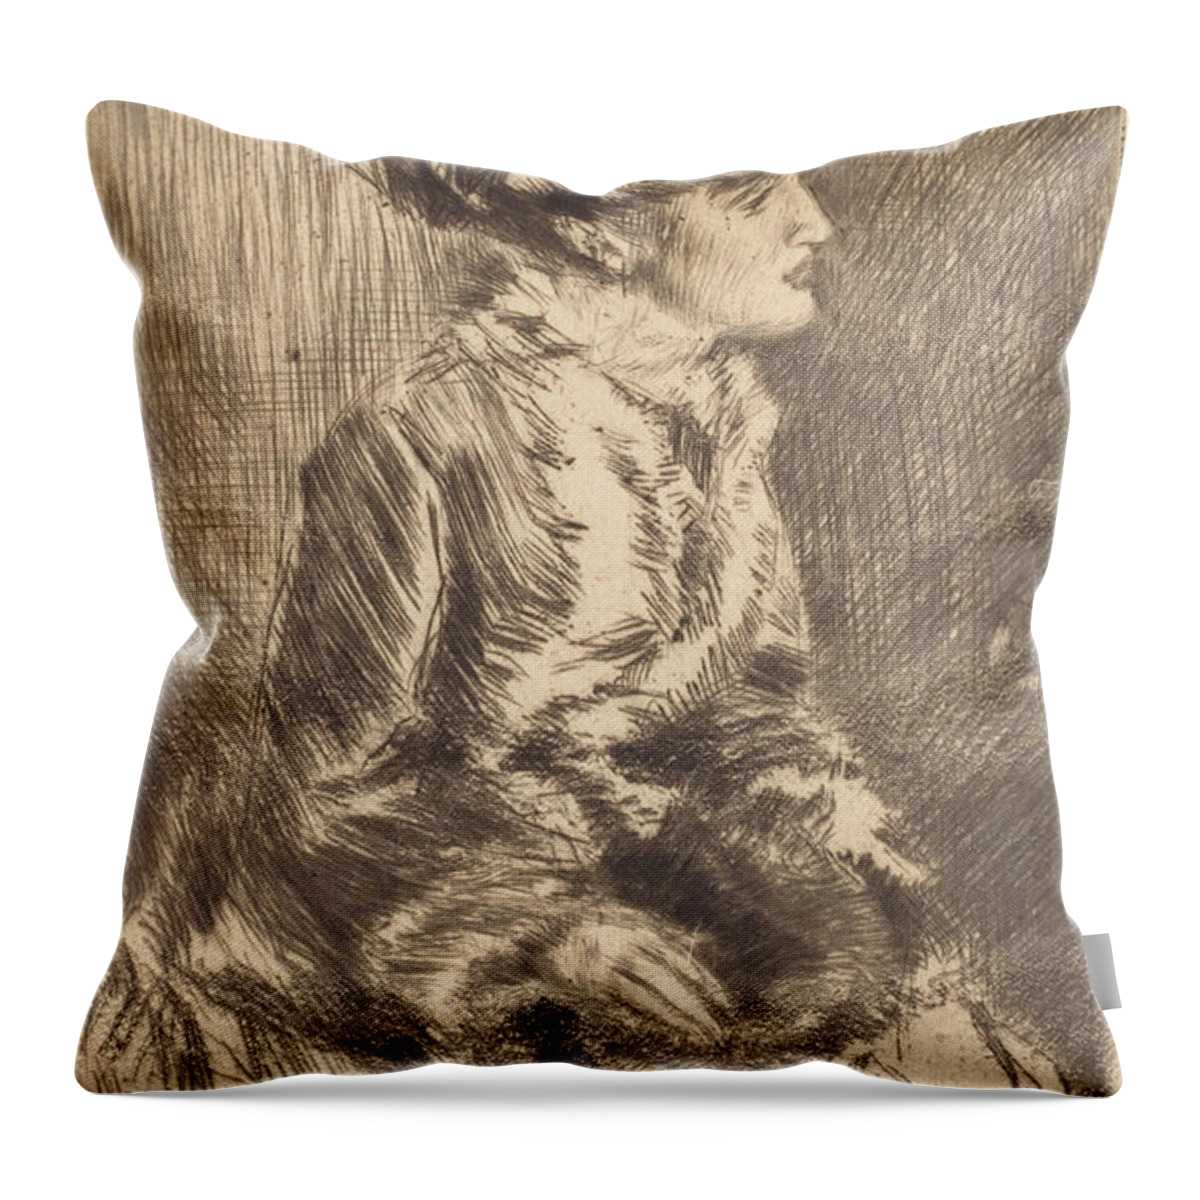  Throw Pillow featuring the drawing The Muff by James Mcneill Whistler